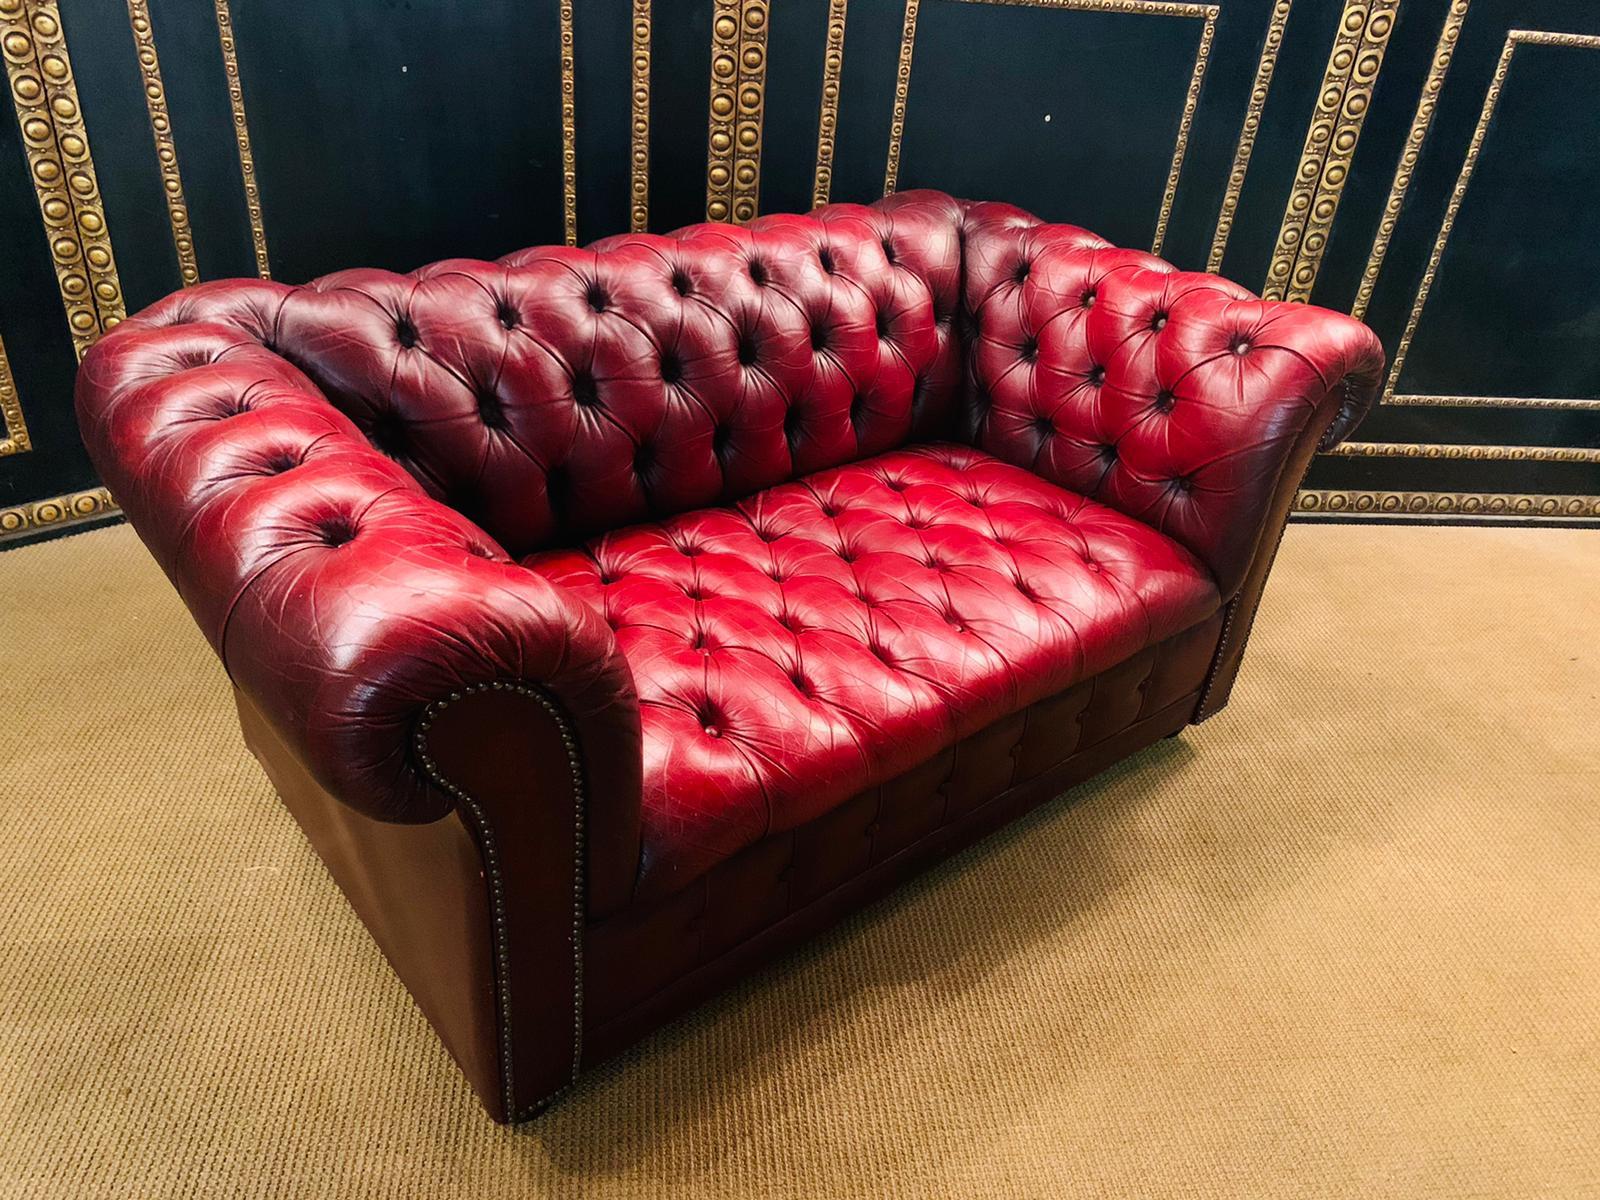 20th Century Stunning Vintage English Red Leather Chesterfield Sofa Made by Pendragon